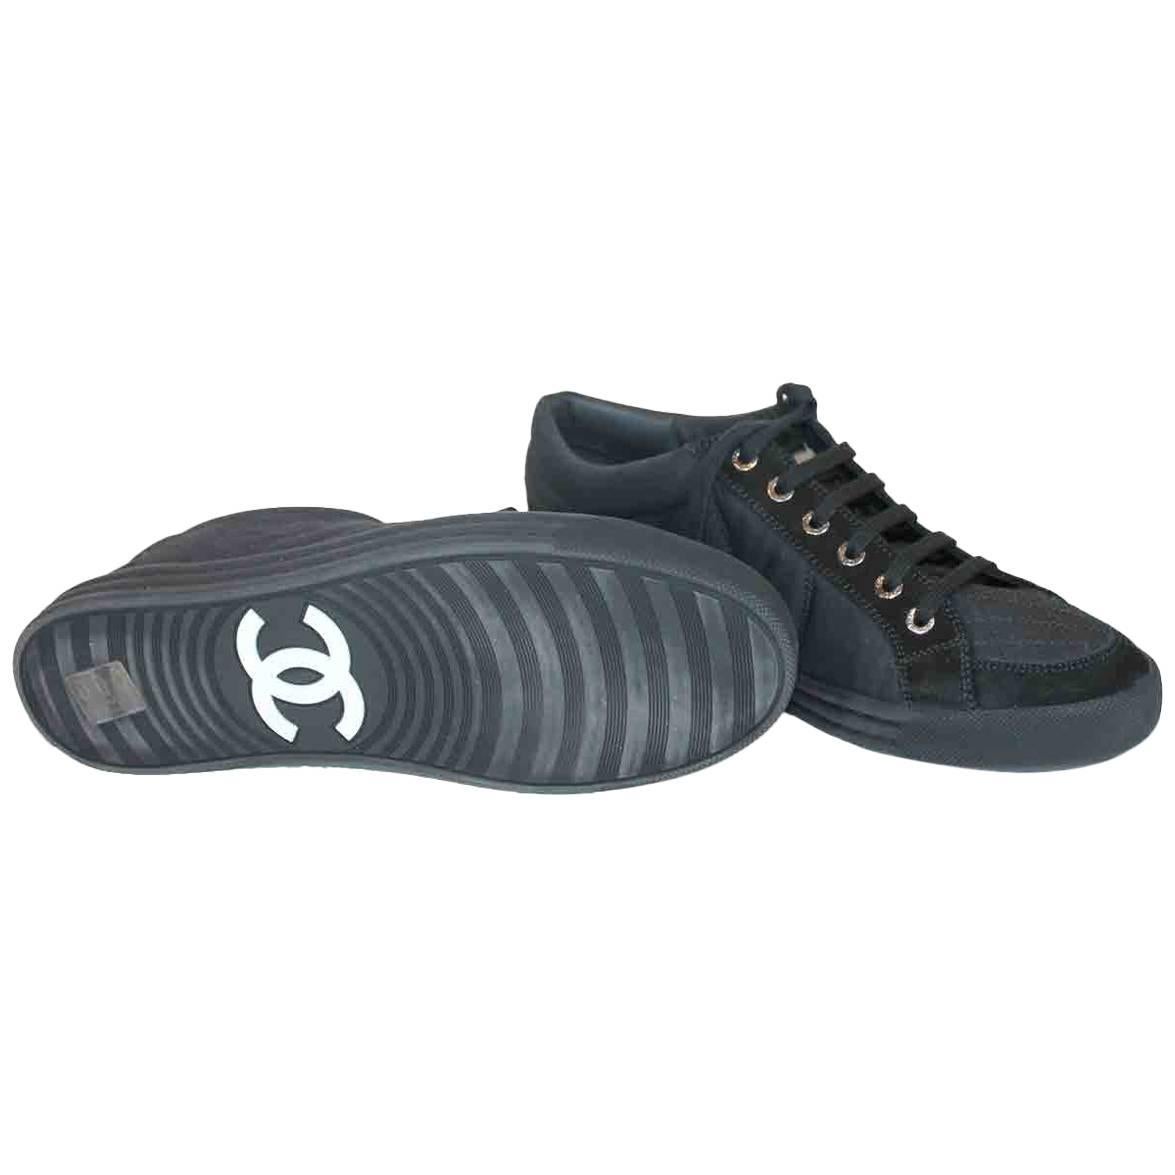 Chanel "CC" Bottom Logo Sneakers For Sale